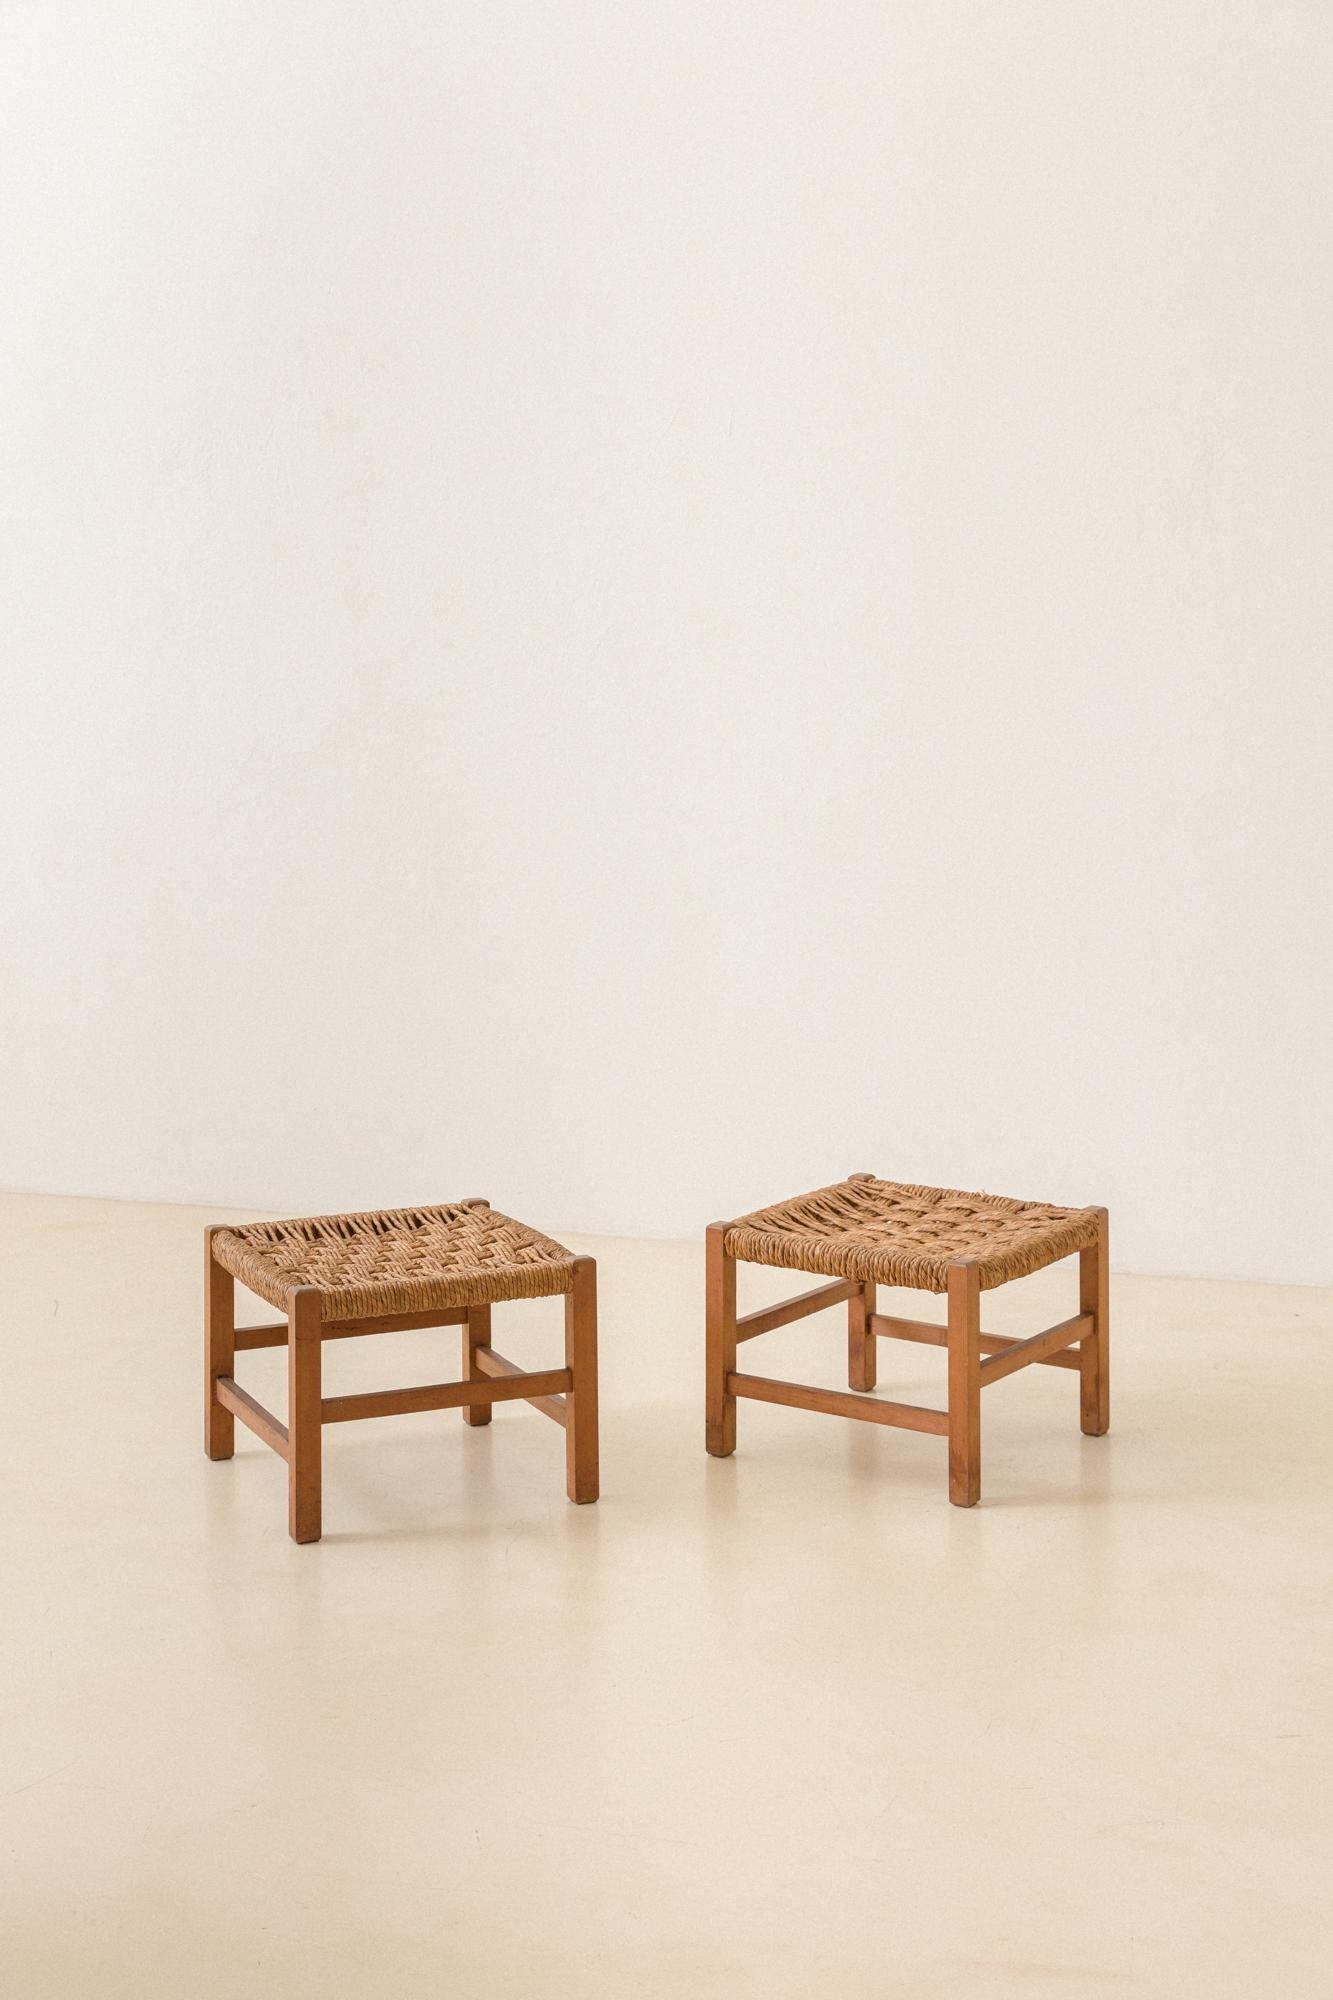 Mid-Century Modern Pair of Brazilian Stools, Rosewood and Taboa Straw, Unknown Designer, 1960s For Sale